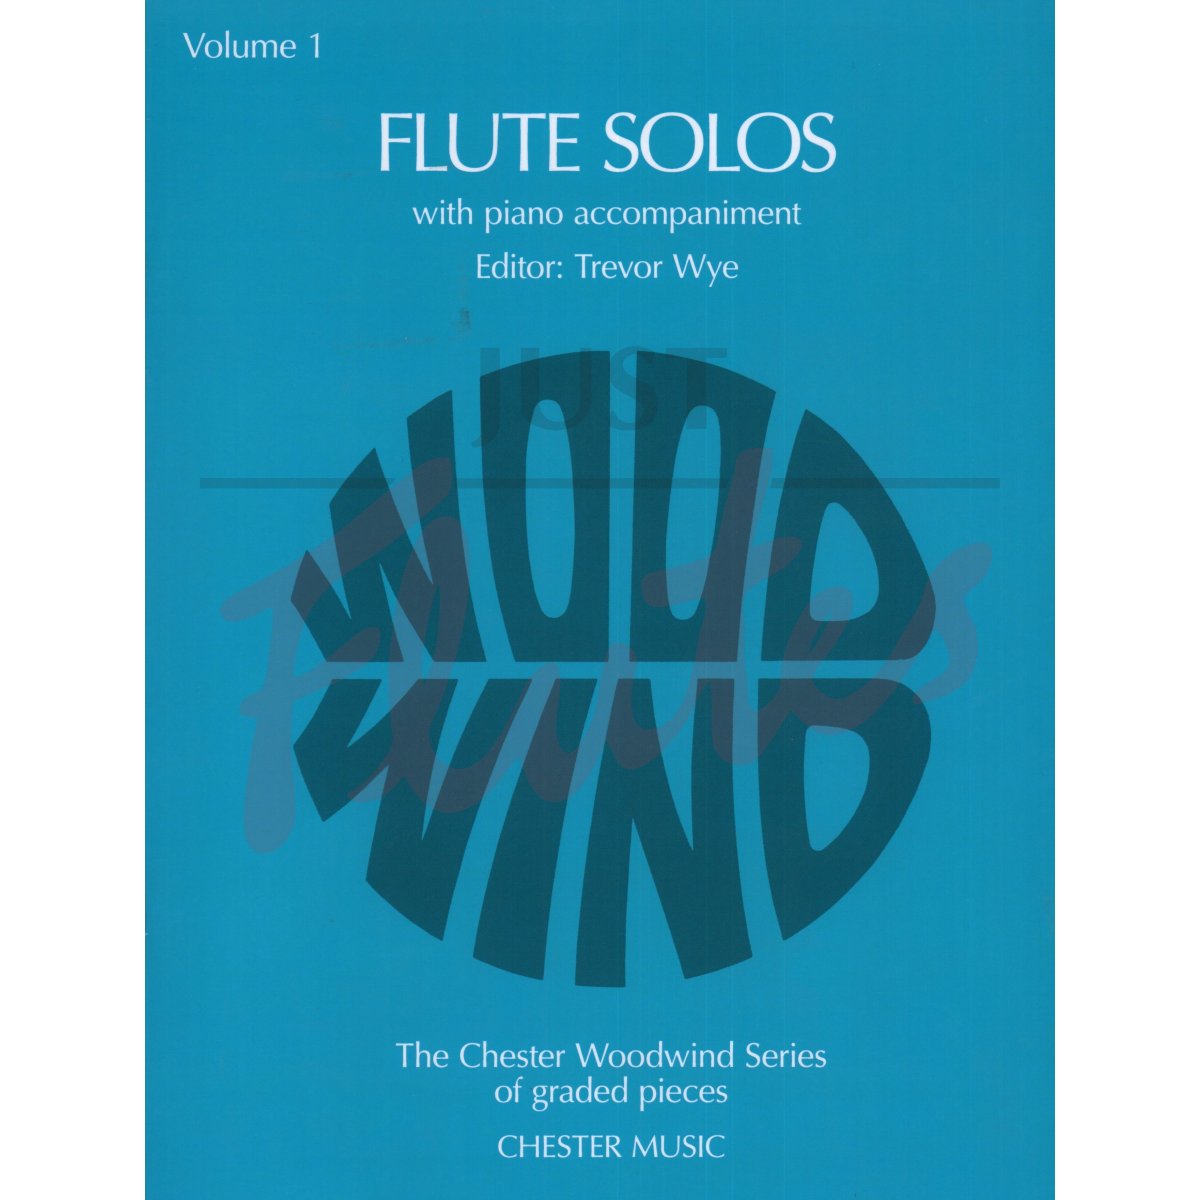 Flute Solos Vol 1 for Flute and Piano